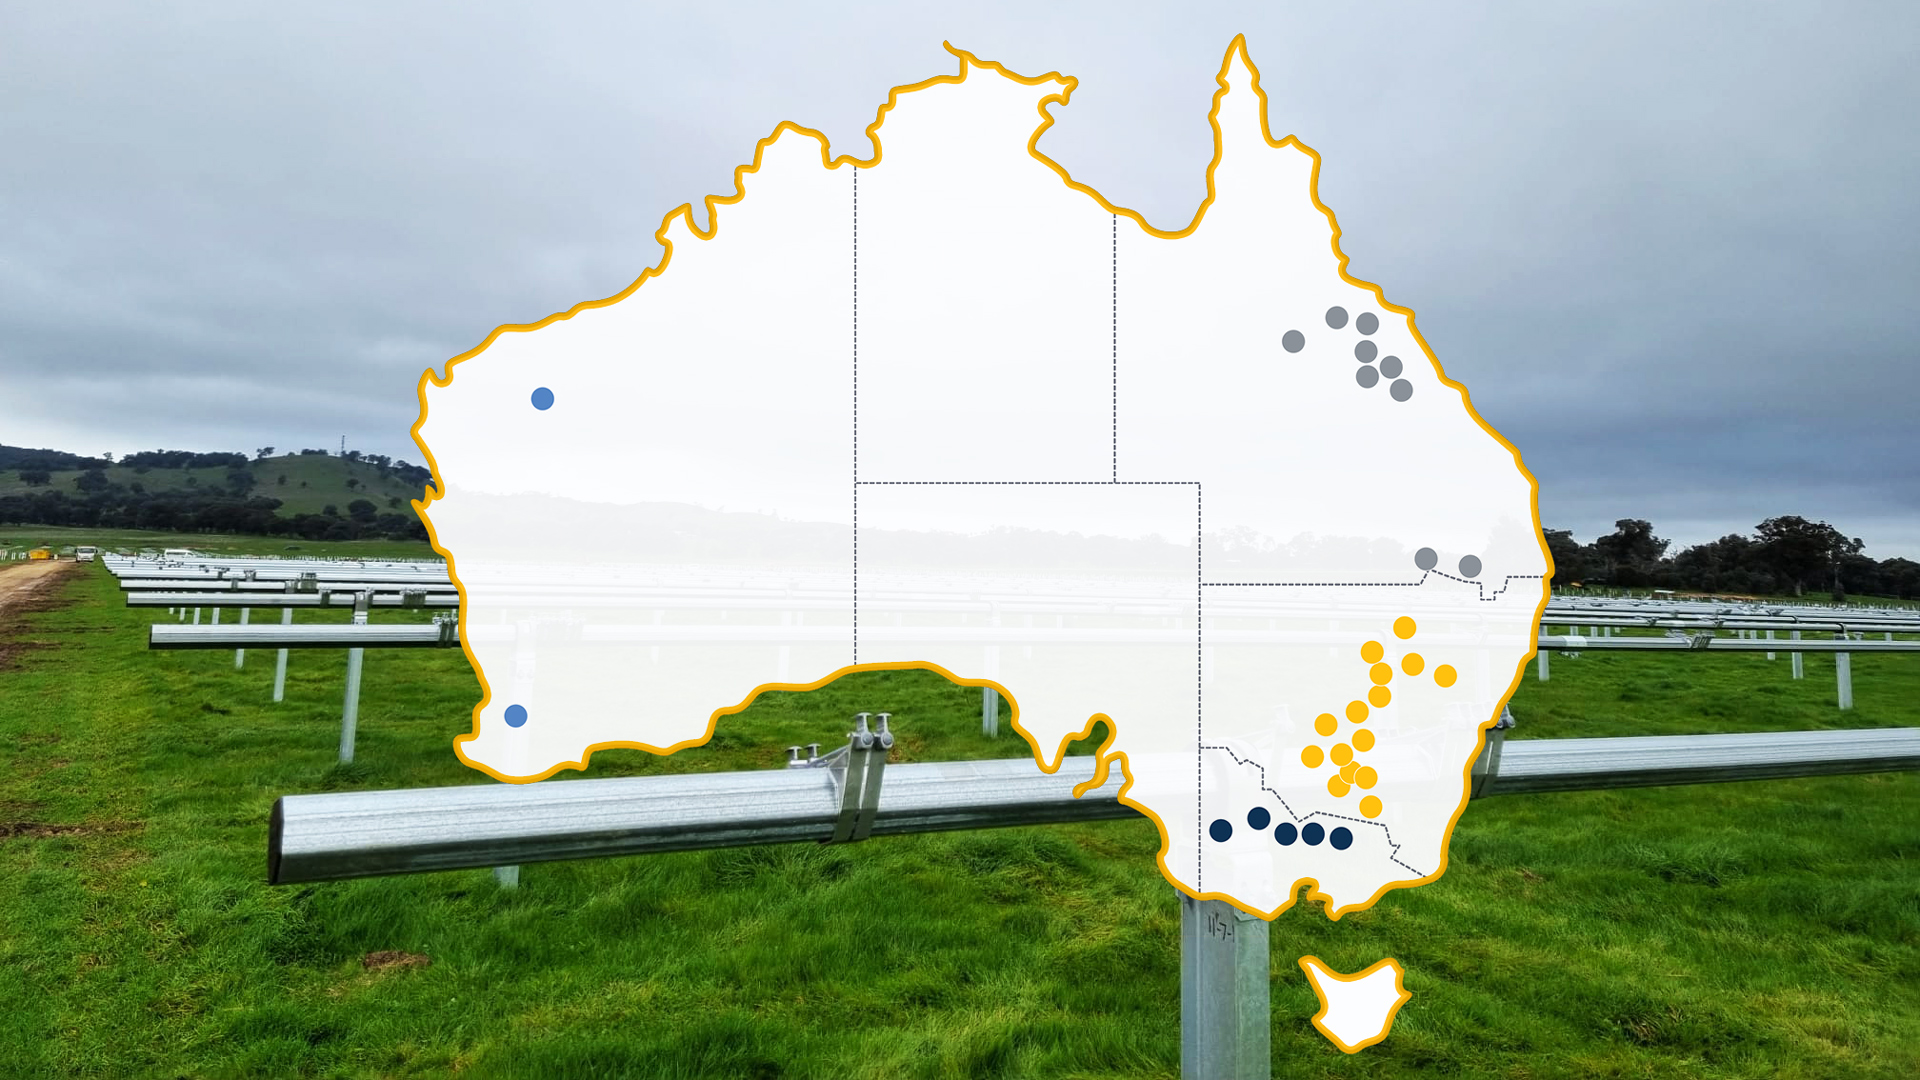 Array can help transform the landscape of small-scale utility solar in Australia